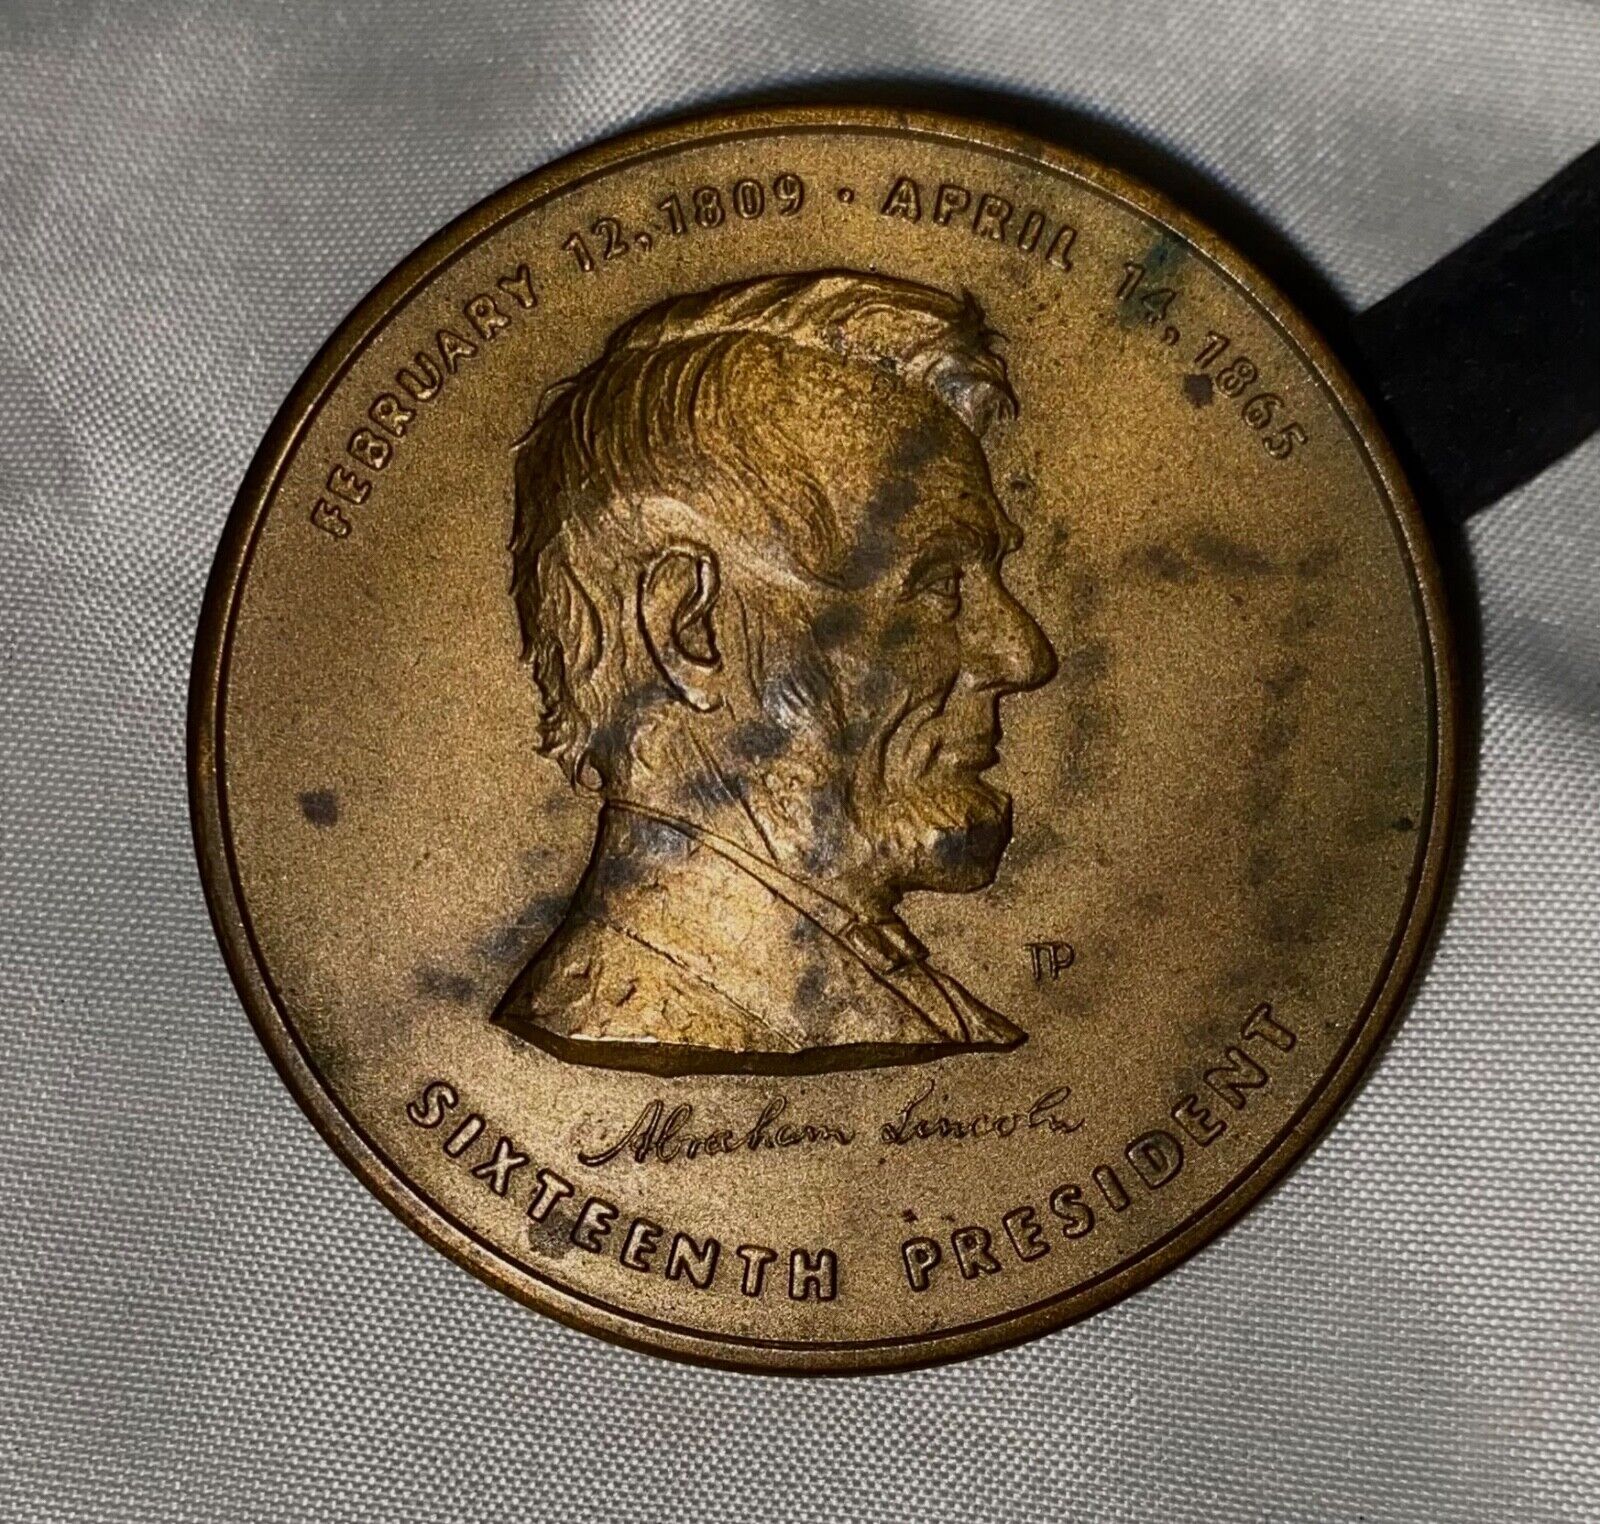 Vintage Bronze Abraham Lincoln 16th President of the US Medal 2” in Diameter